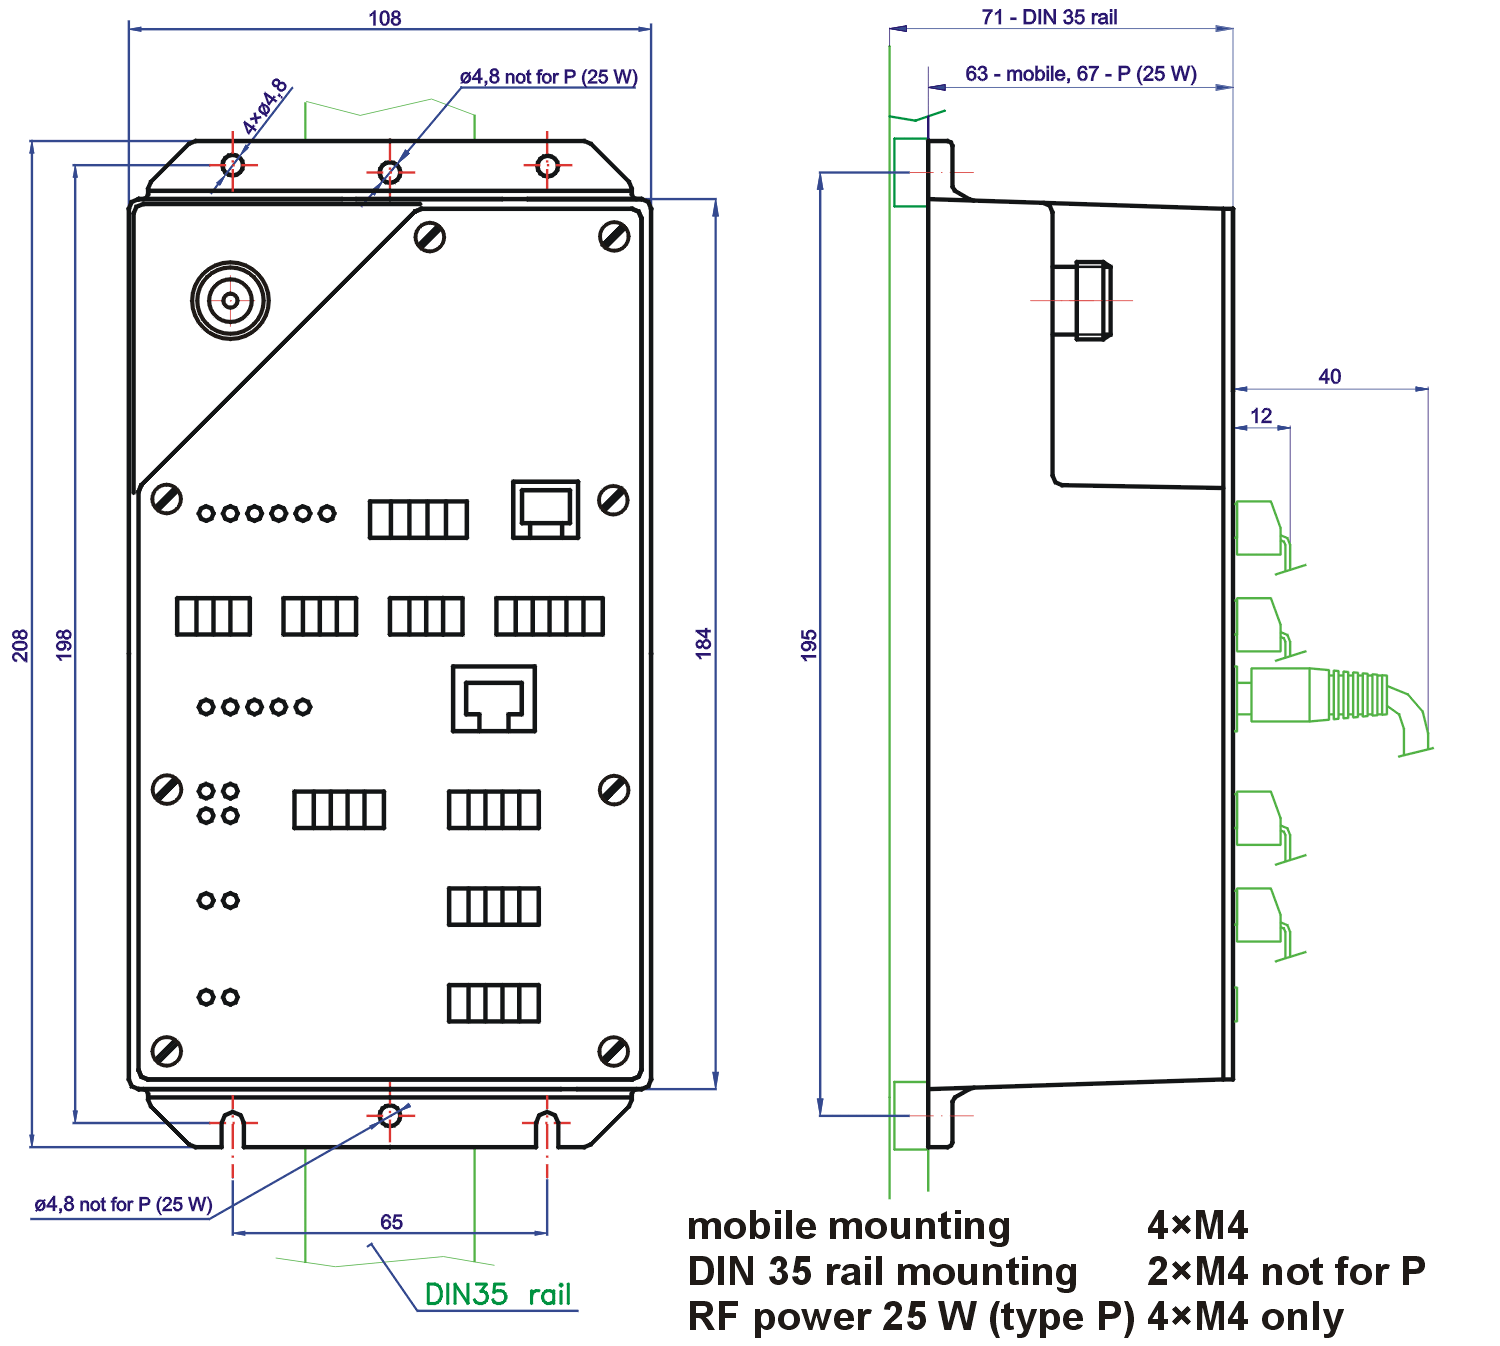 Mounting dimensions of the radiomodem MR400, MR300 and MR160